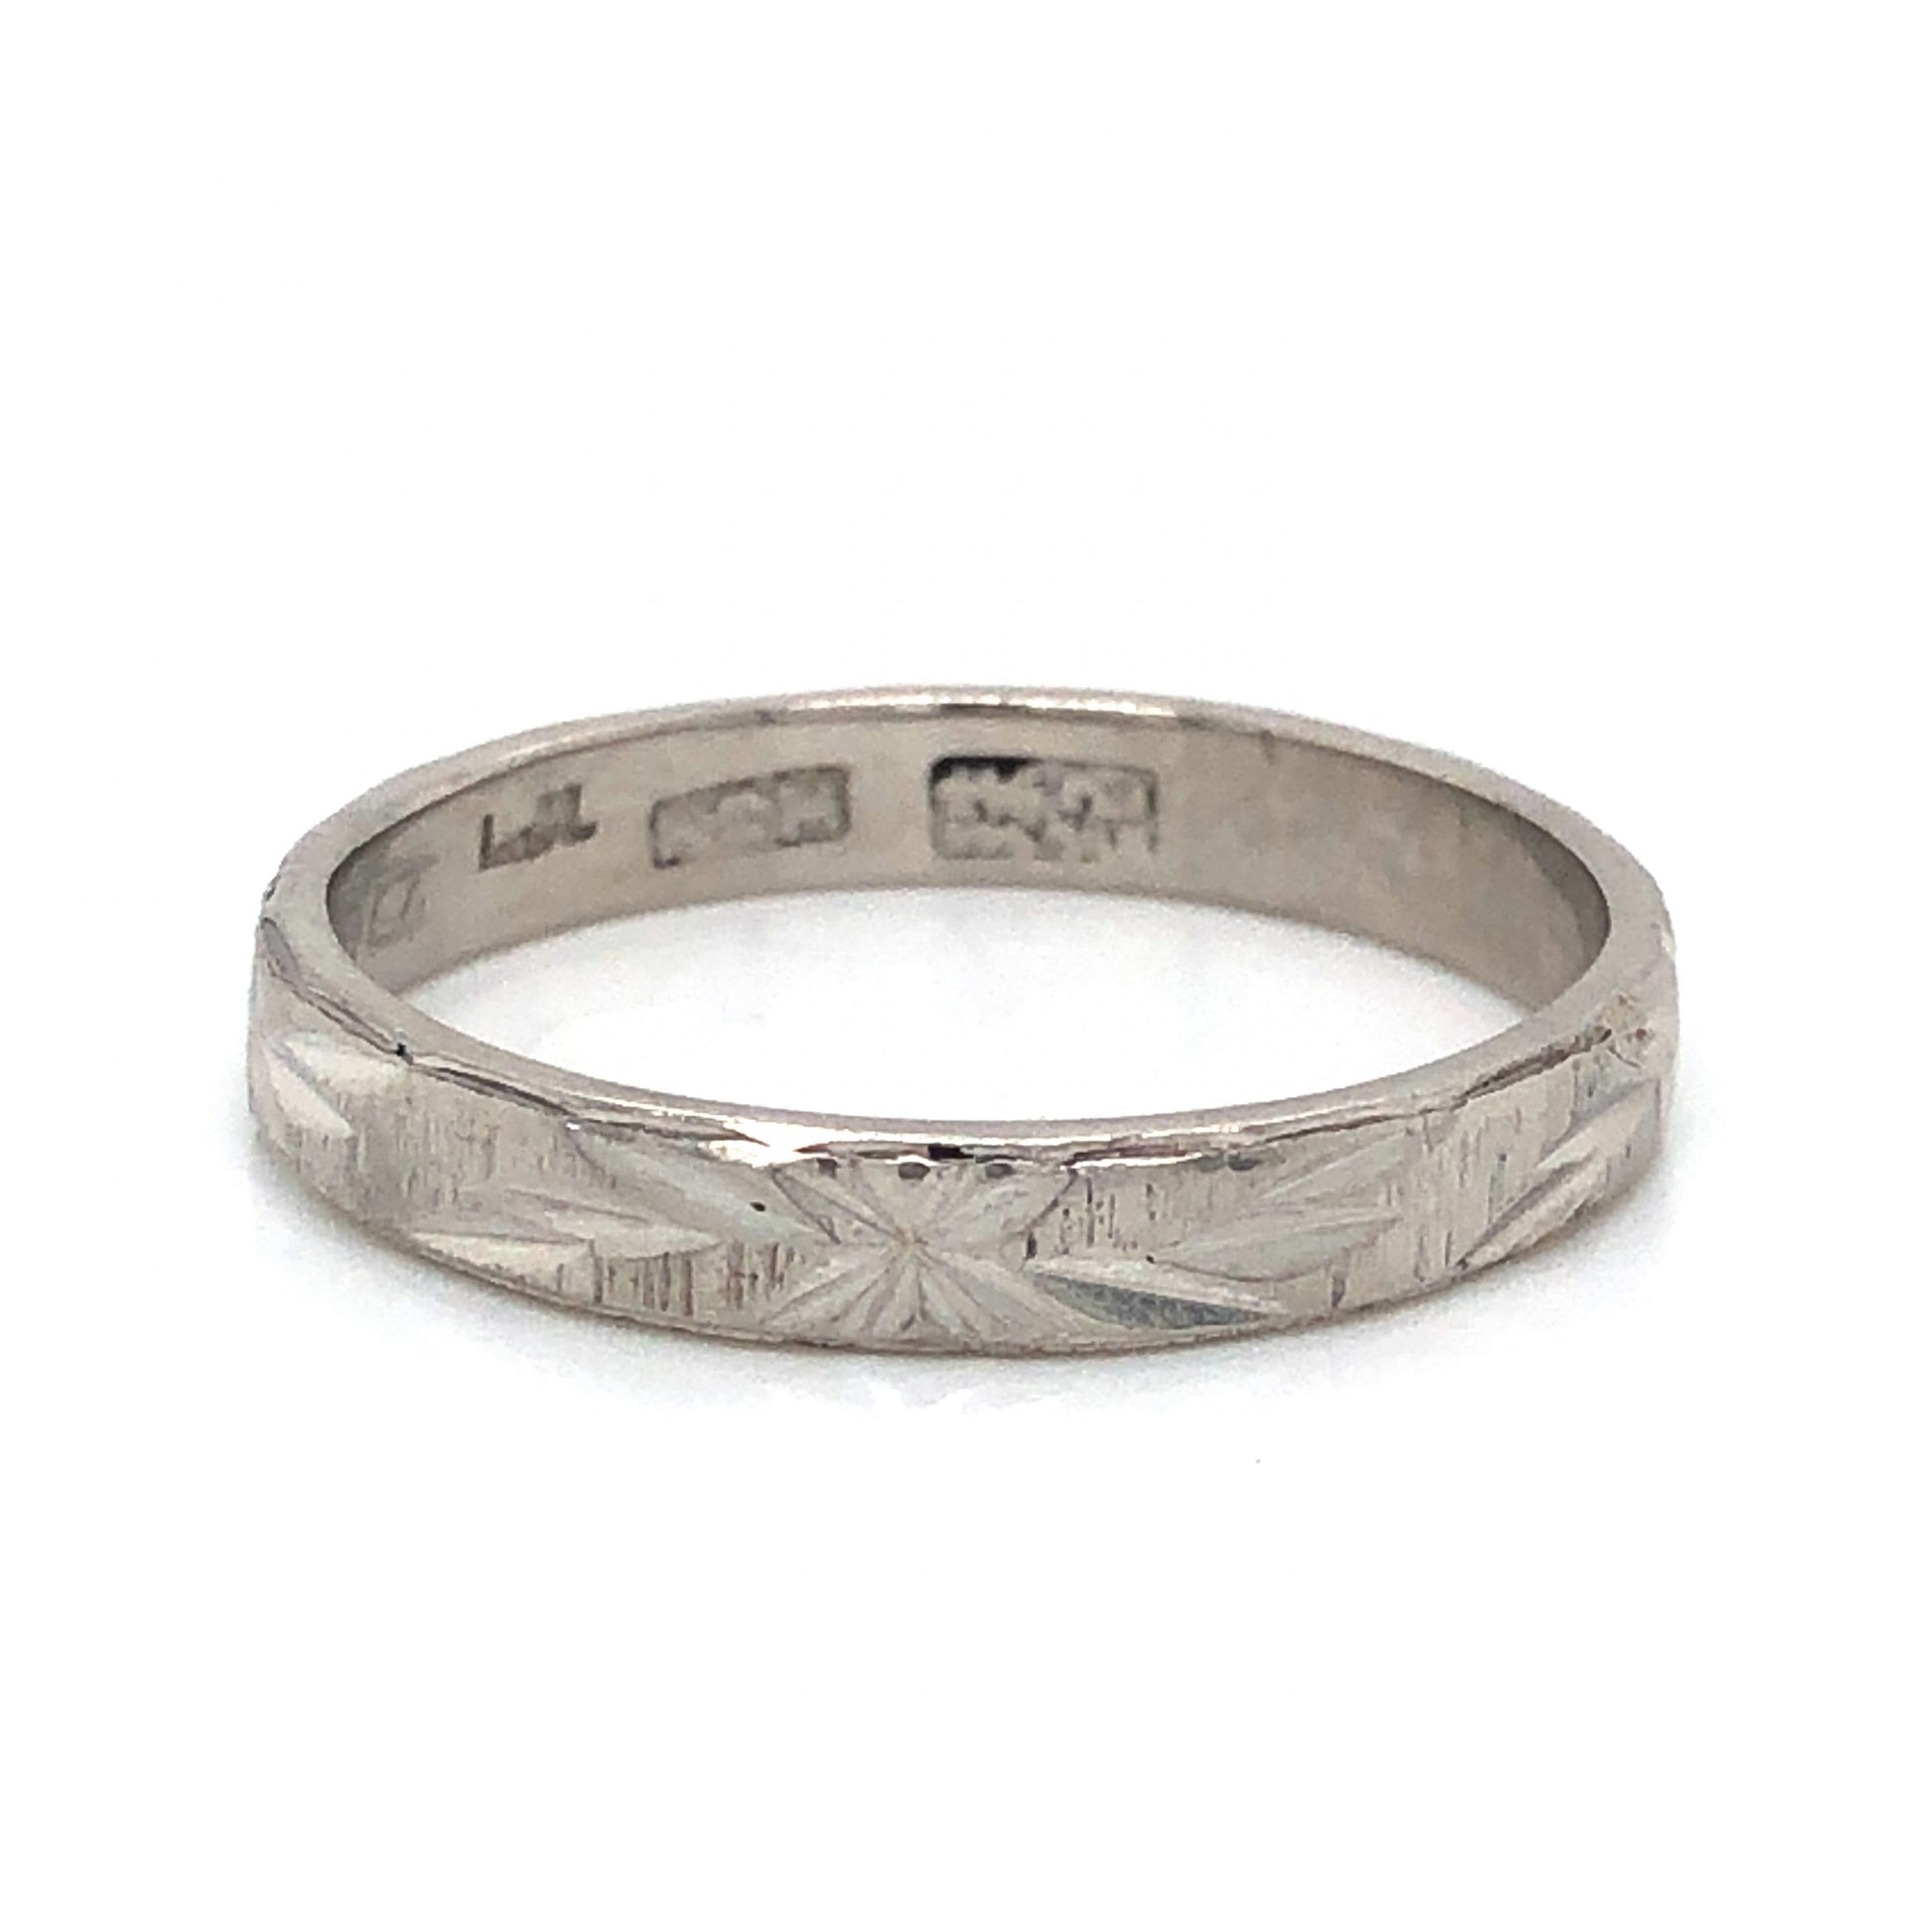 Art Deco Hand Engraved Wedding Band in PlatinumComposition: Platinum Ring Size: 7.5 Total Gram Weight: 3.5 g Inscription: L.H. Dorothy Lo
      